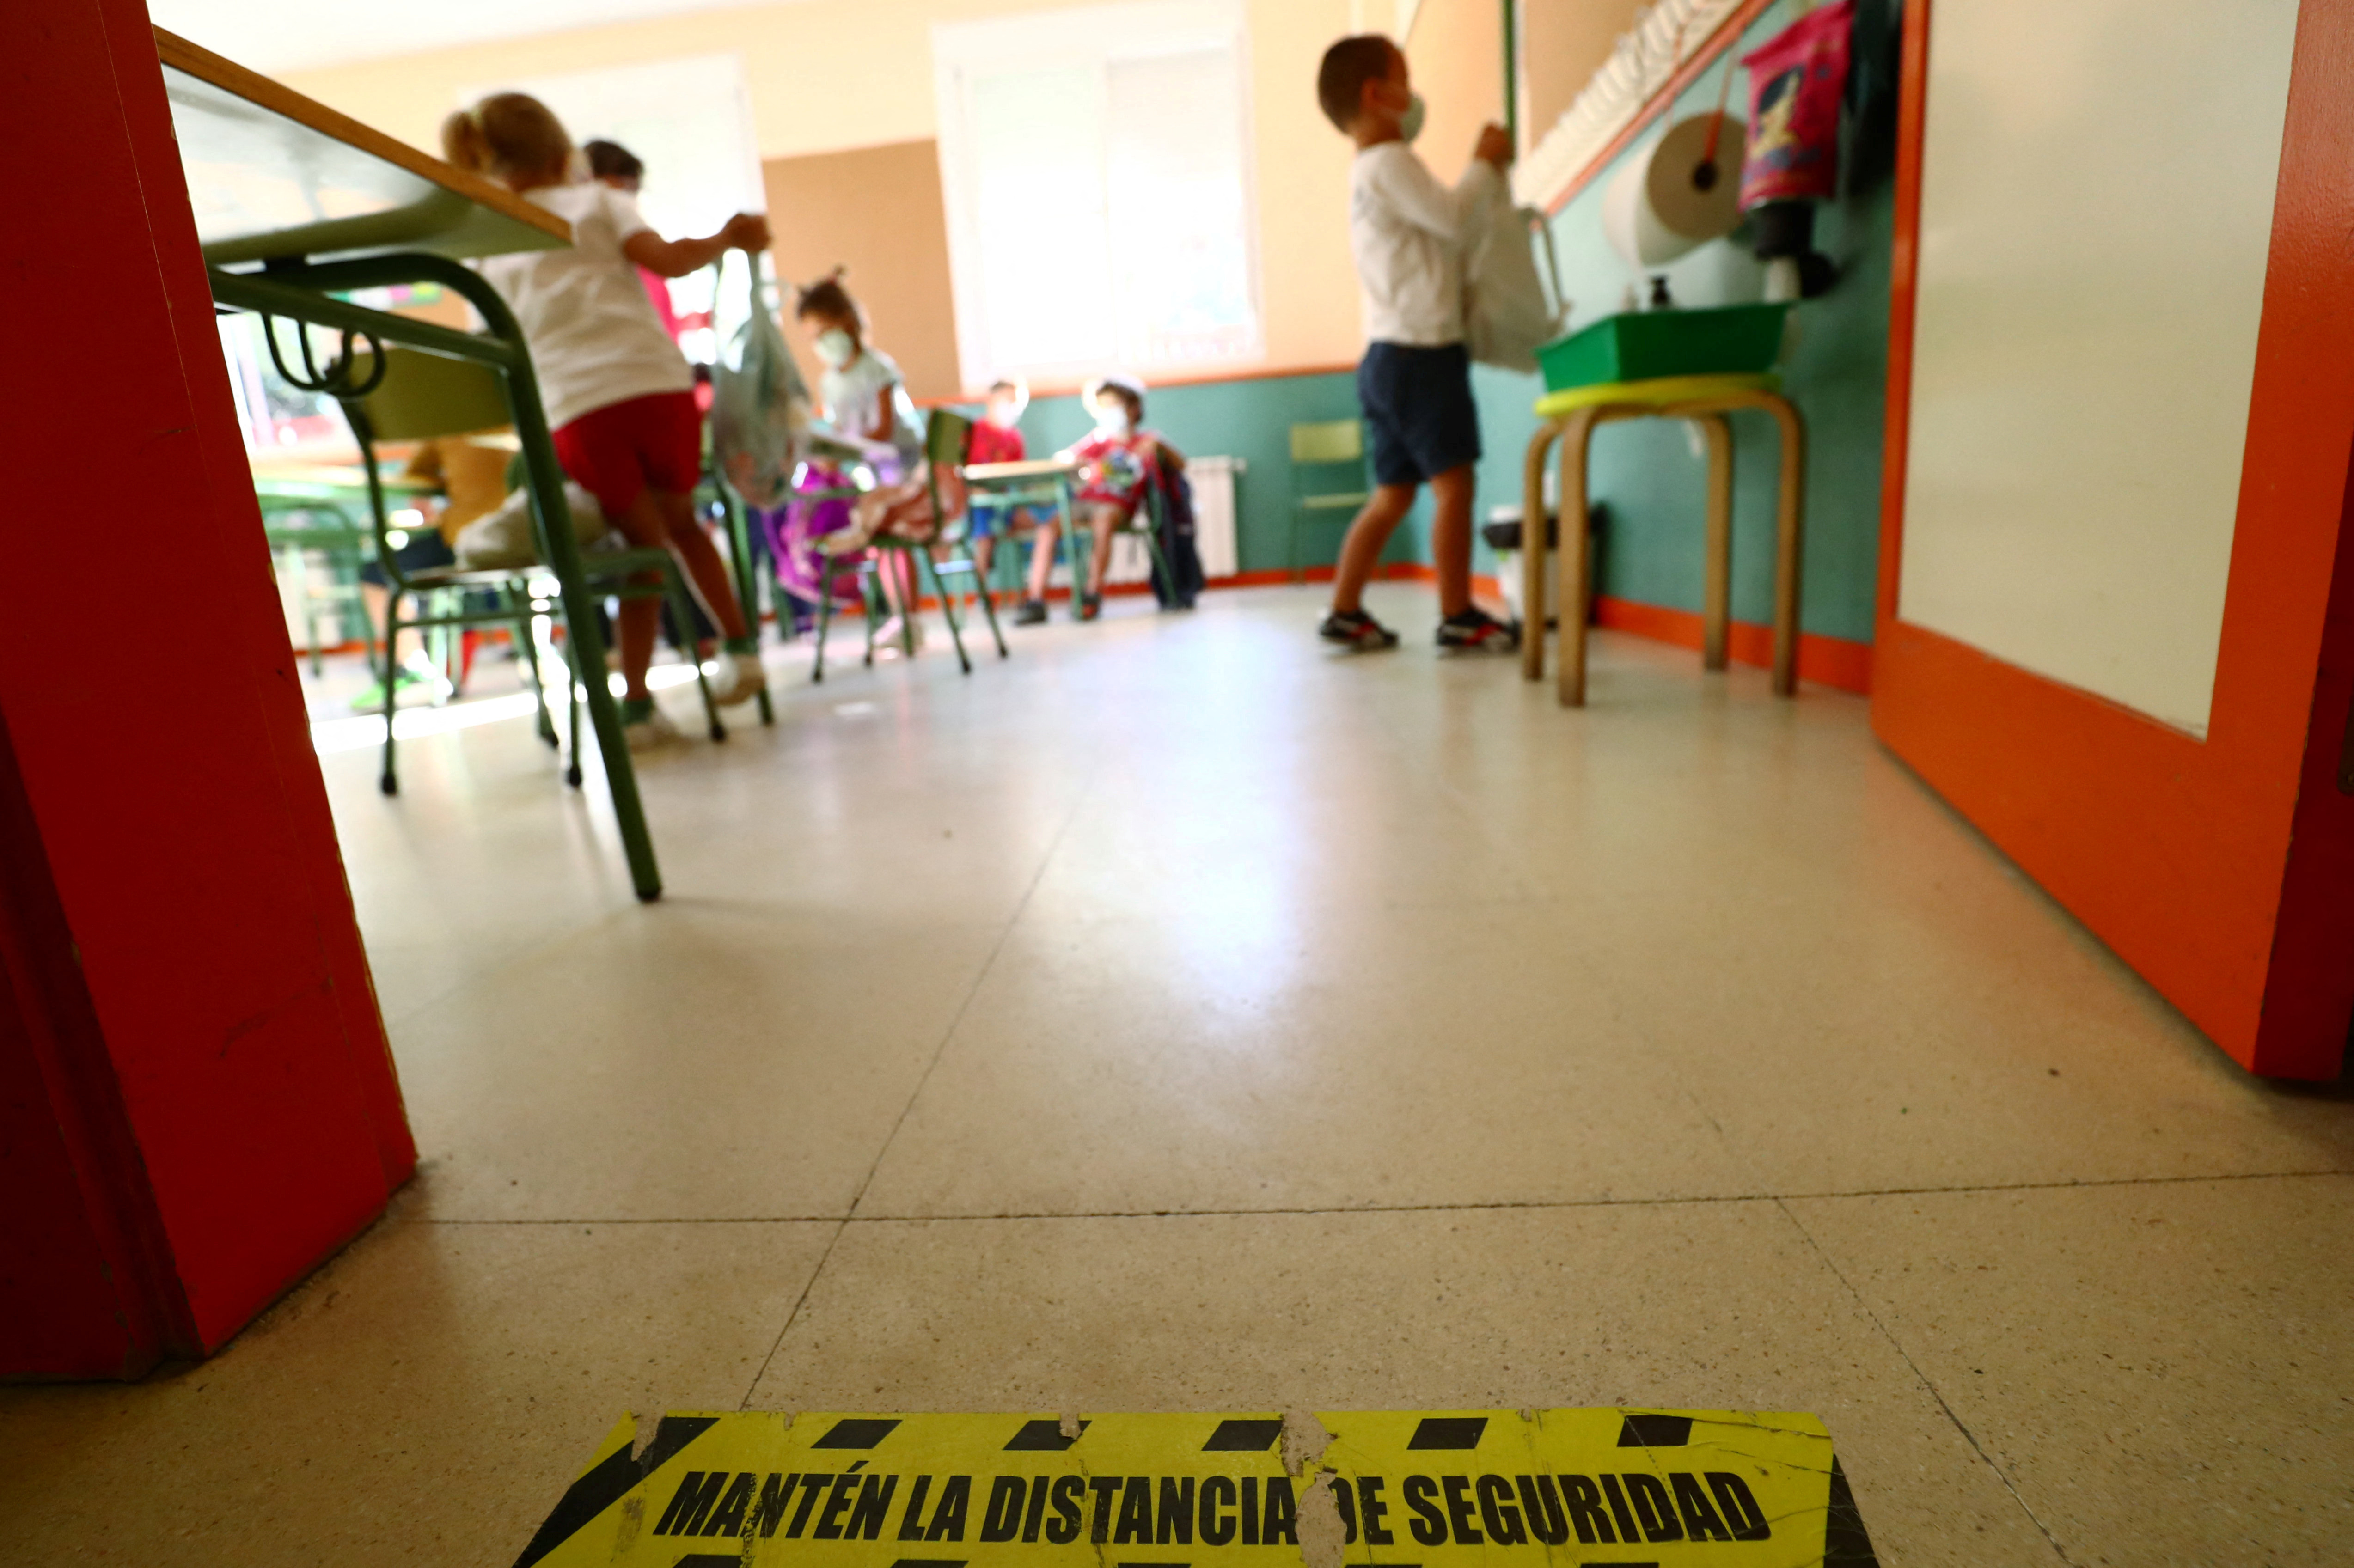 A social distancing mark is seen on the floor as pupils arrive on the first day of school amid the coronavirus disease (COVID-19) outbreak in Madrid